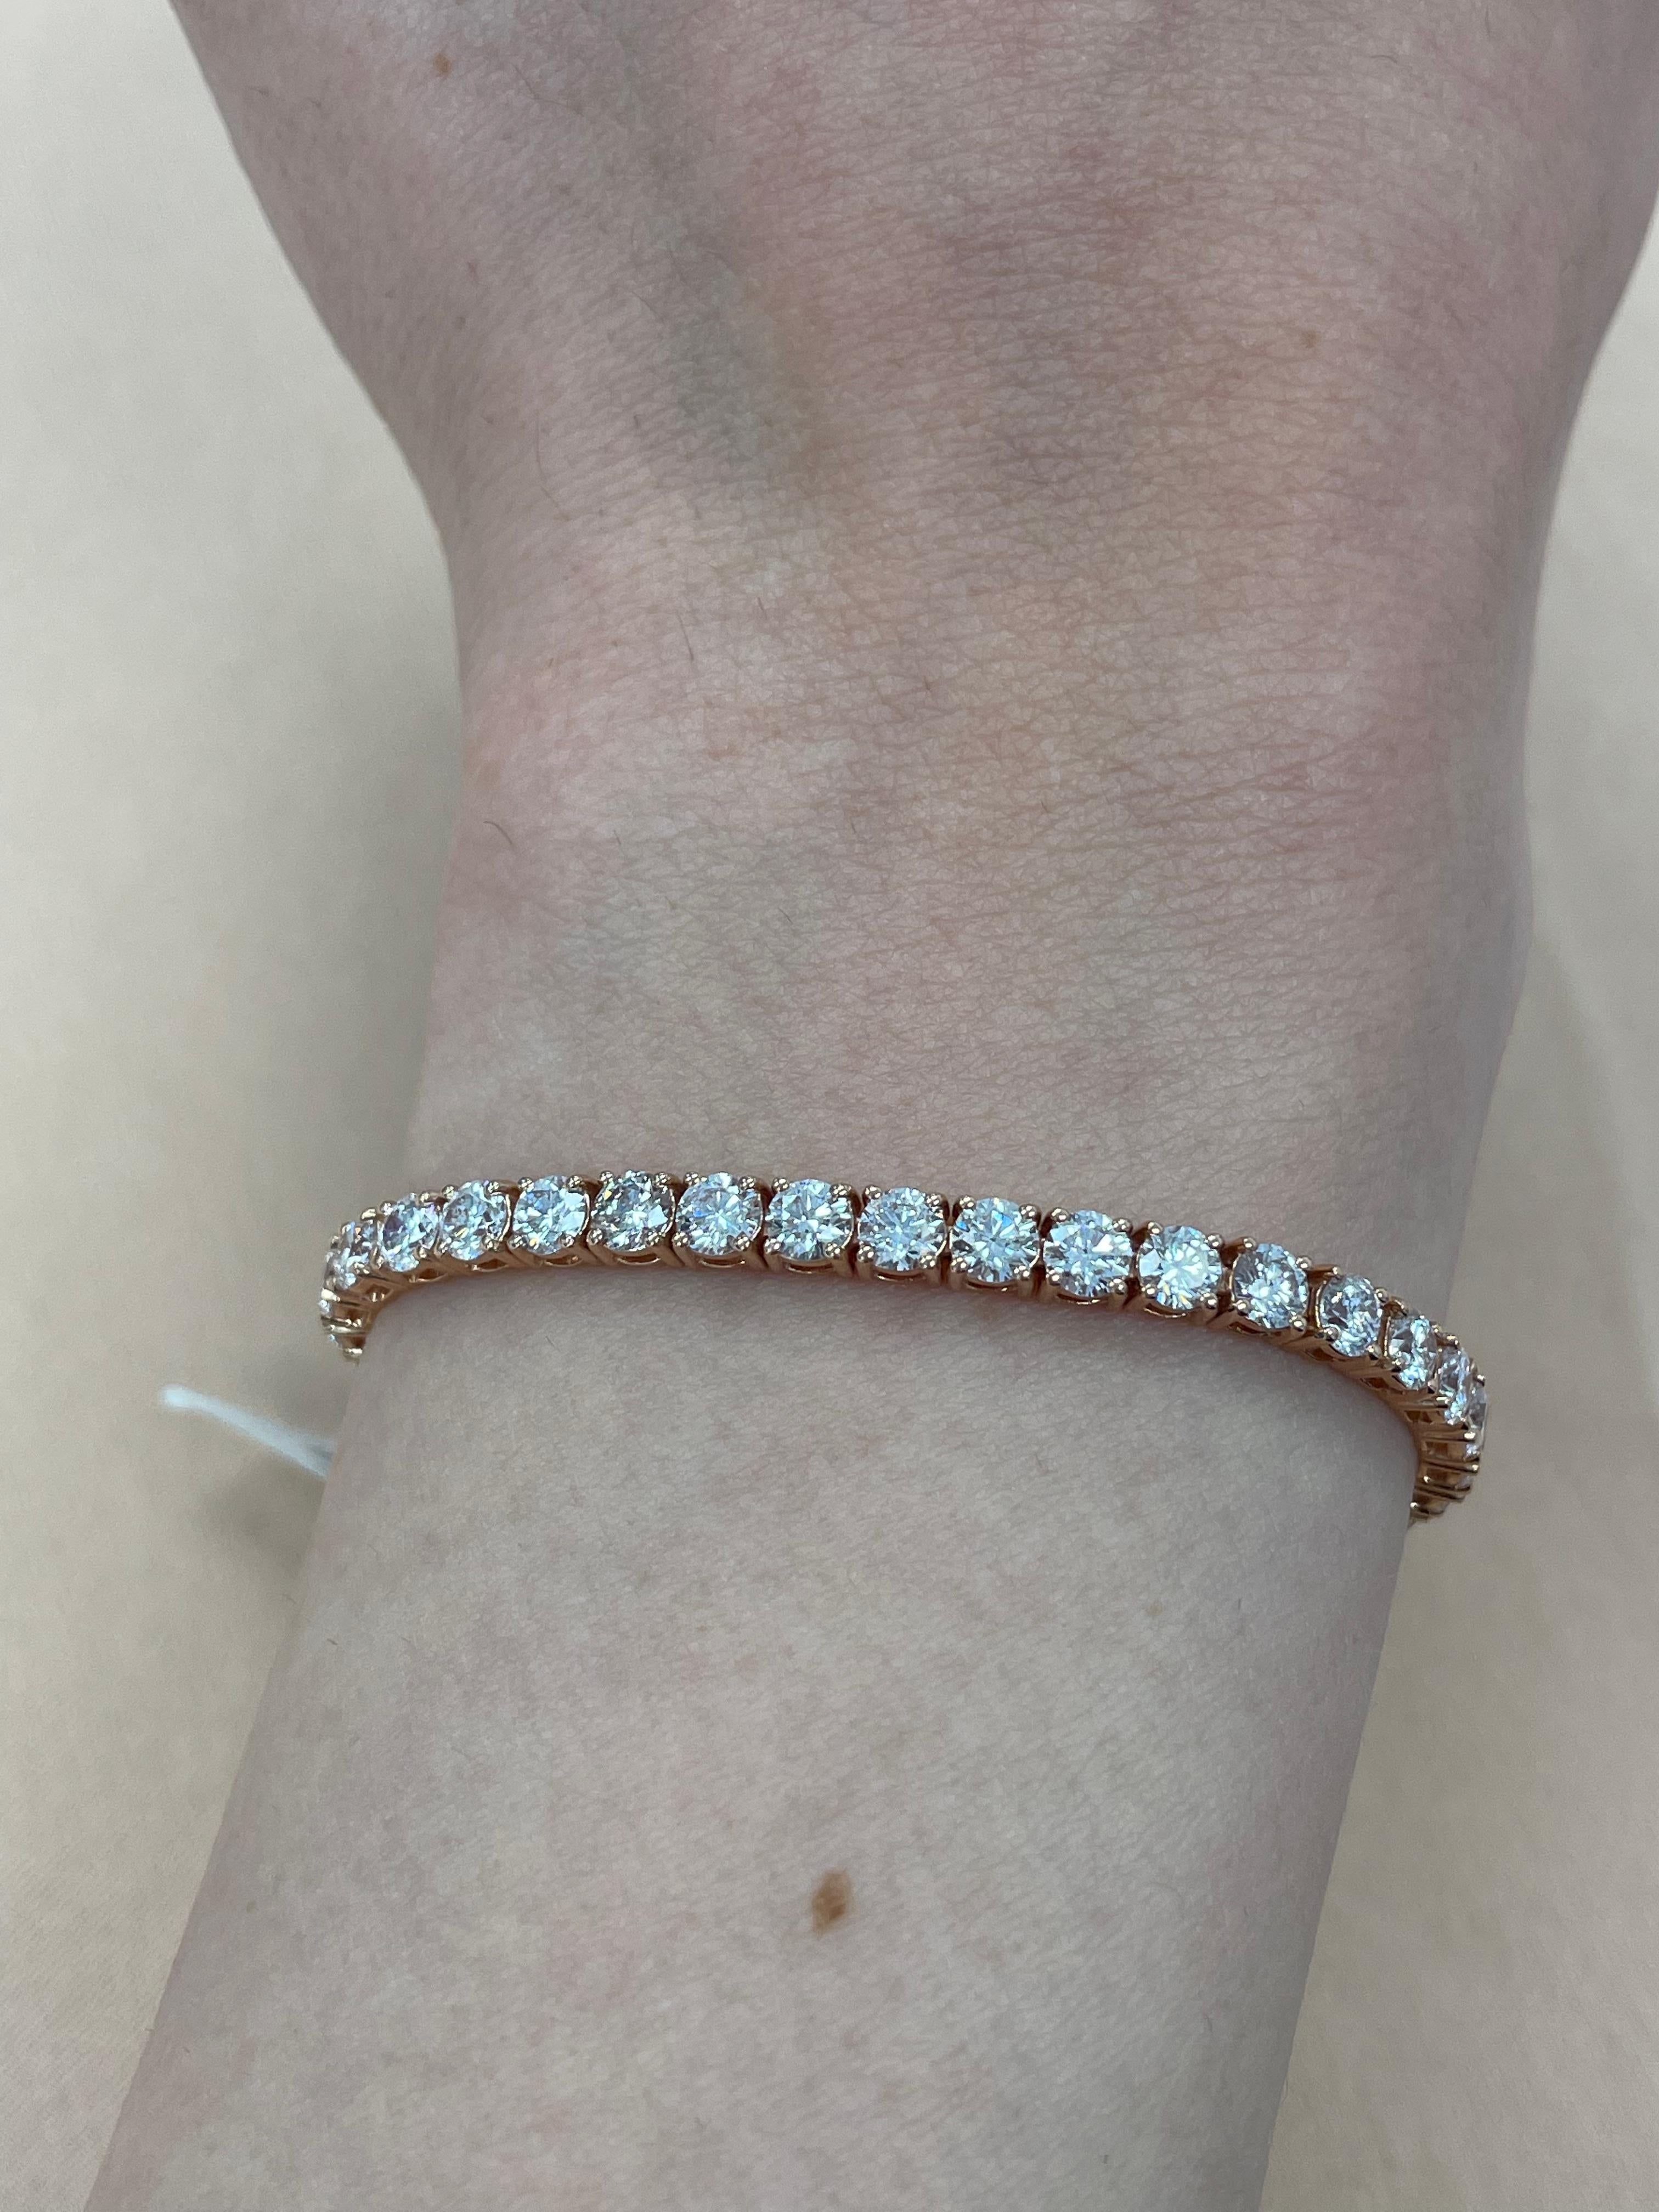 Exquisite and timeless diamonds tennis bracelet, by Alexander Beverly Hills.
47 round brilliant diamonds, 7.92 carats total. Approximately F/G color and VS clarity. Four prong set in 14k rose gold, 10.86 grams, 7 inches. 
Accommodated with an